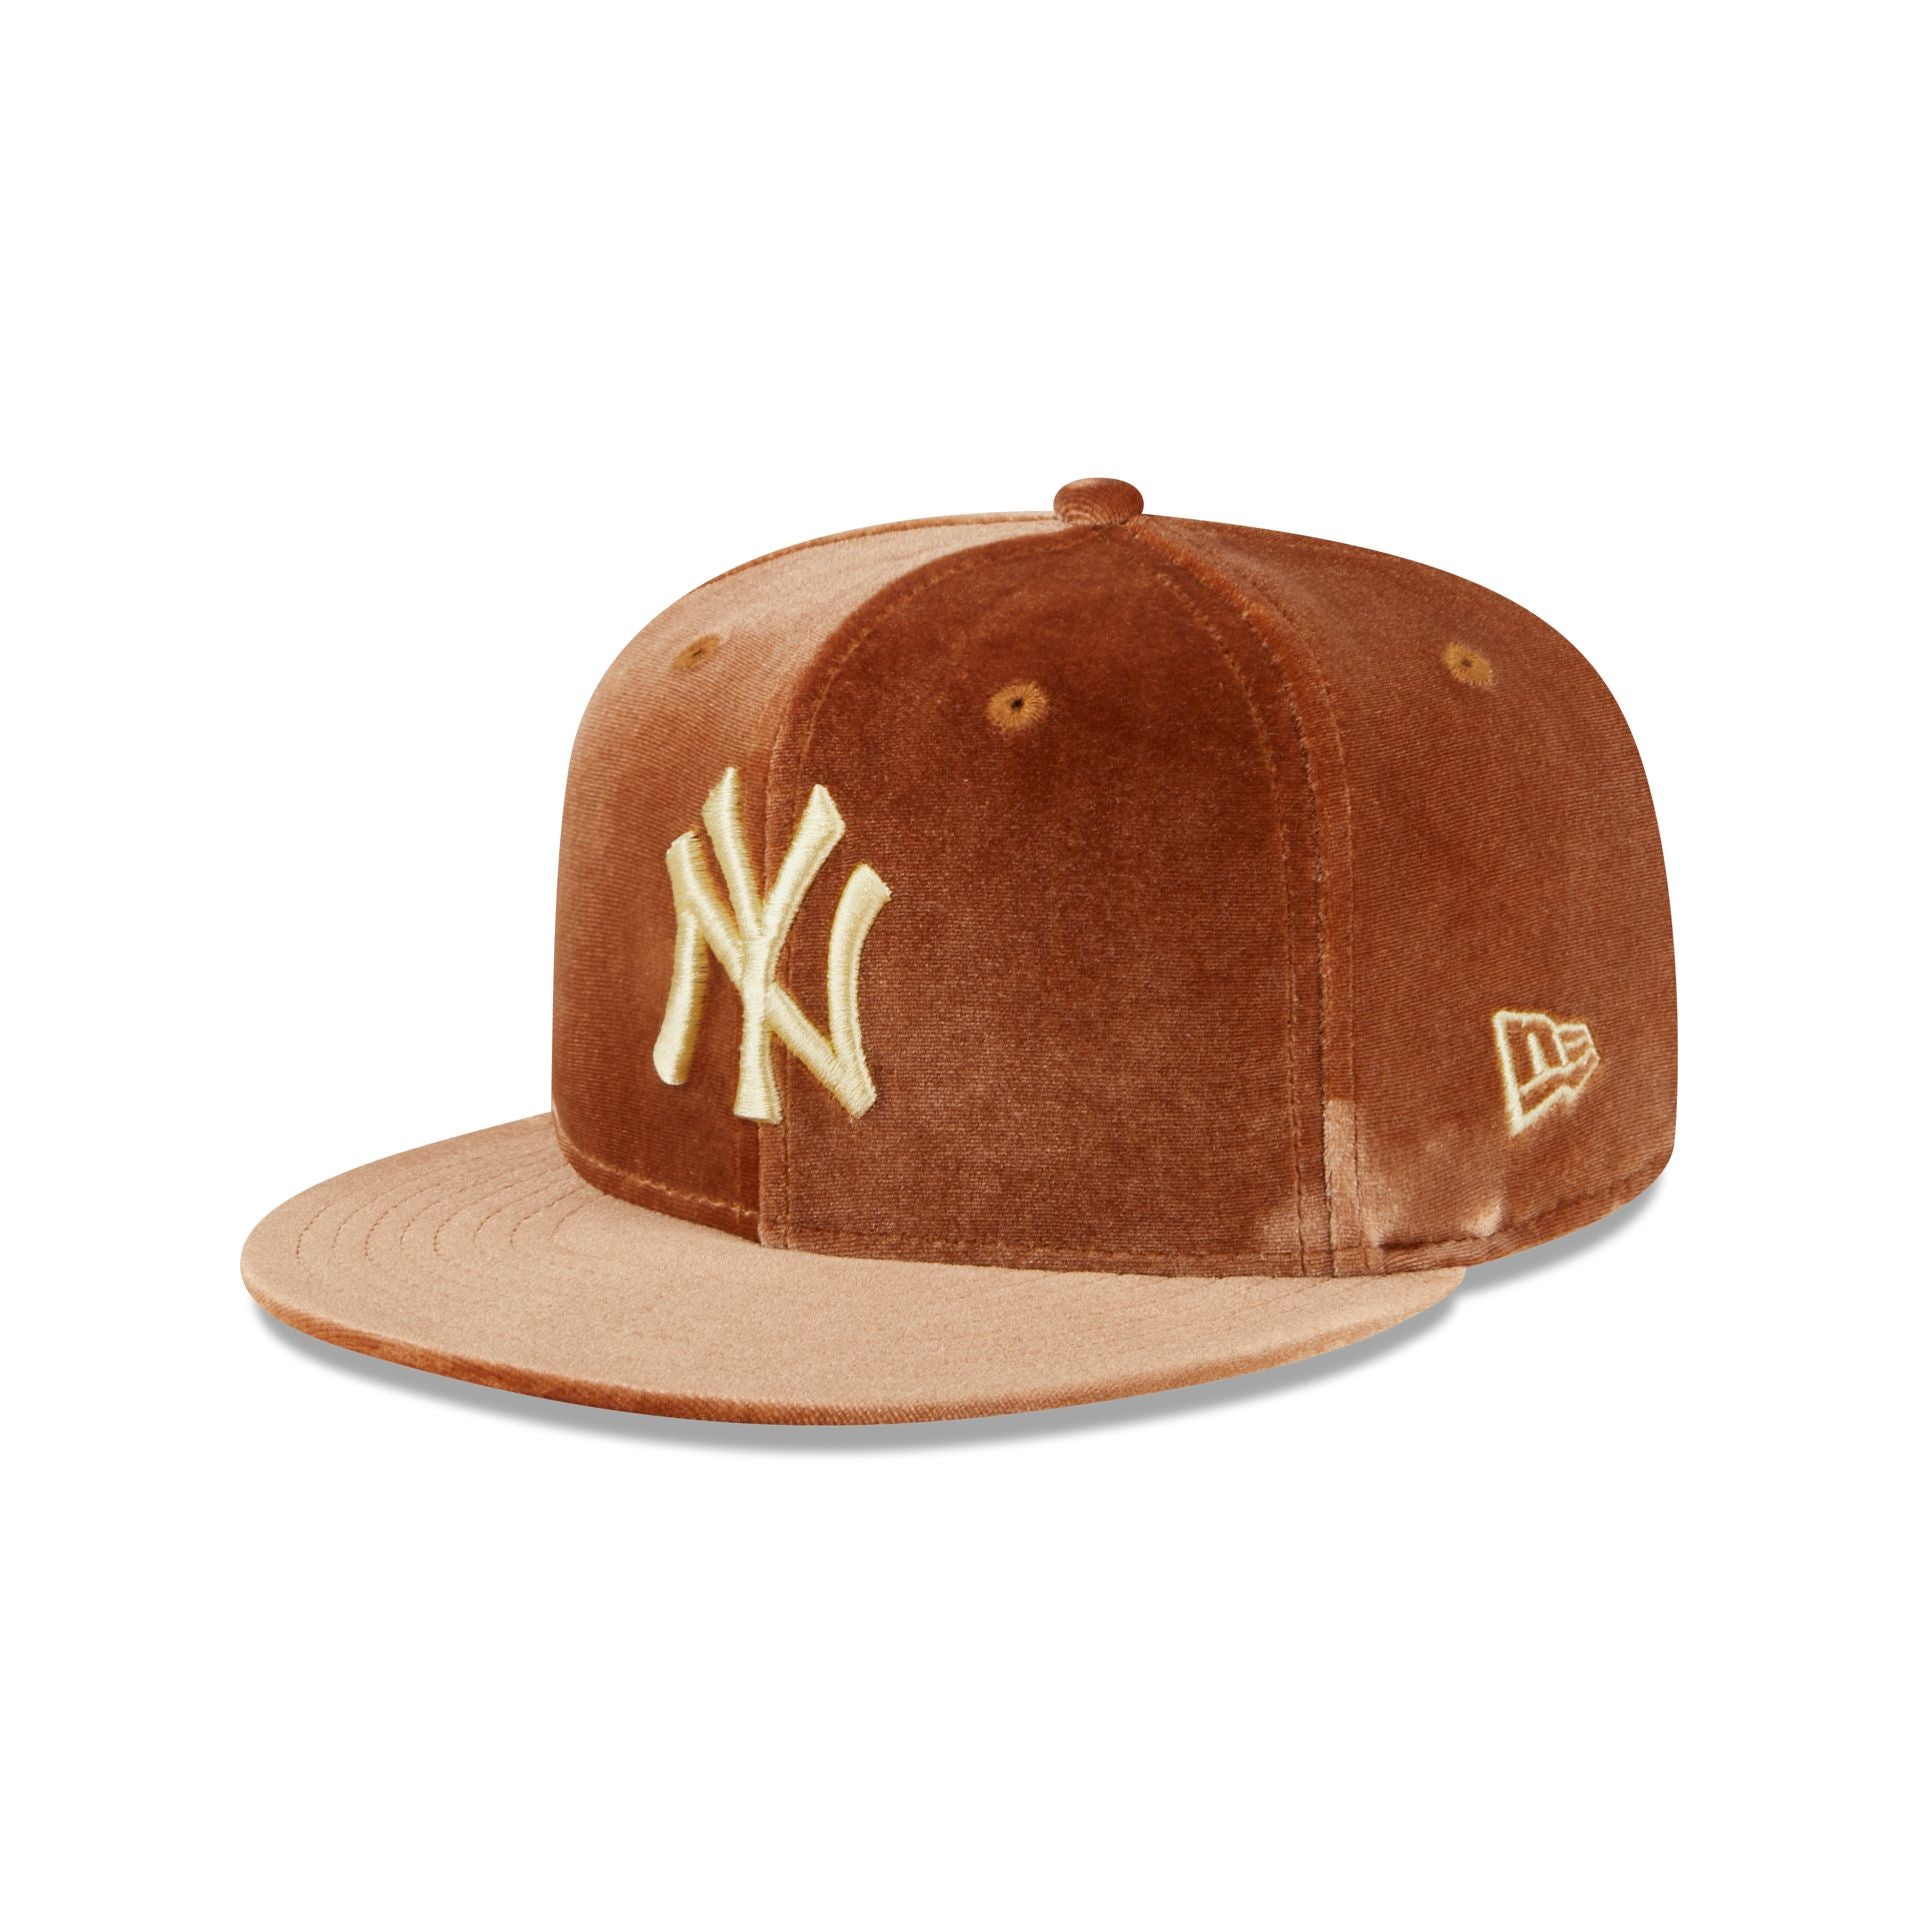 New Era 59Fifty Fitted Cap - Los Angeles Dodgers panama tan